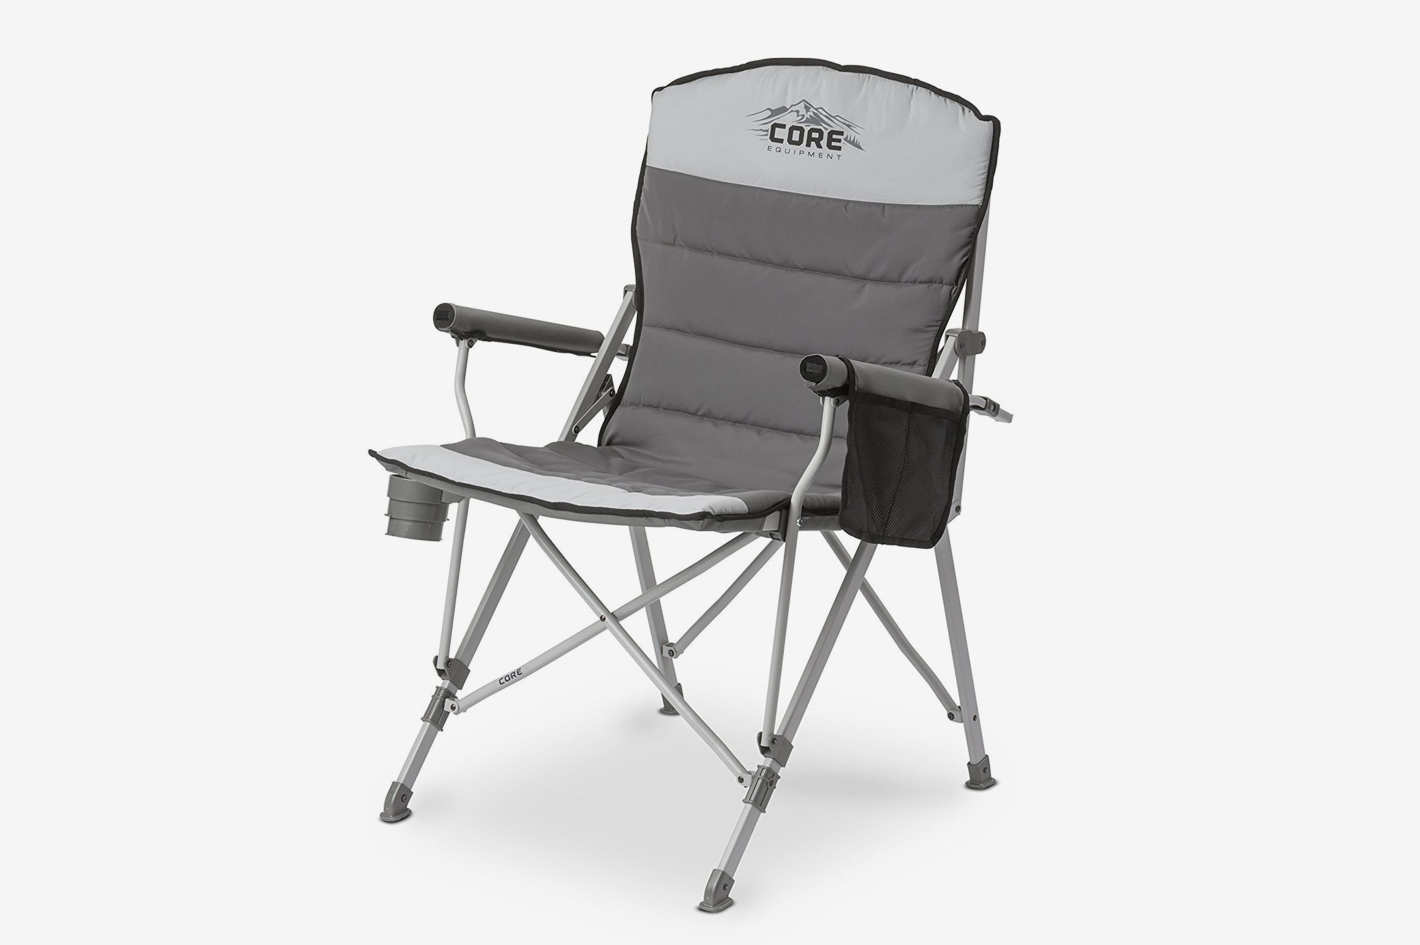 The Best Camping Chairs on Amazon - best-cooler.reviews